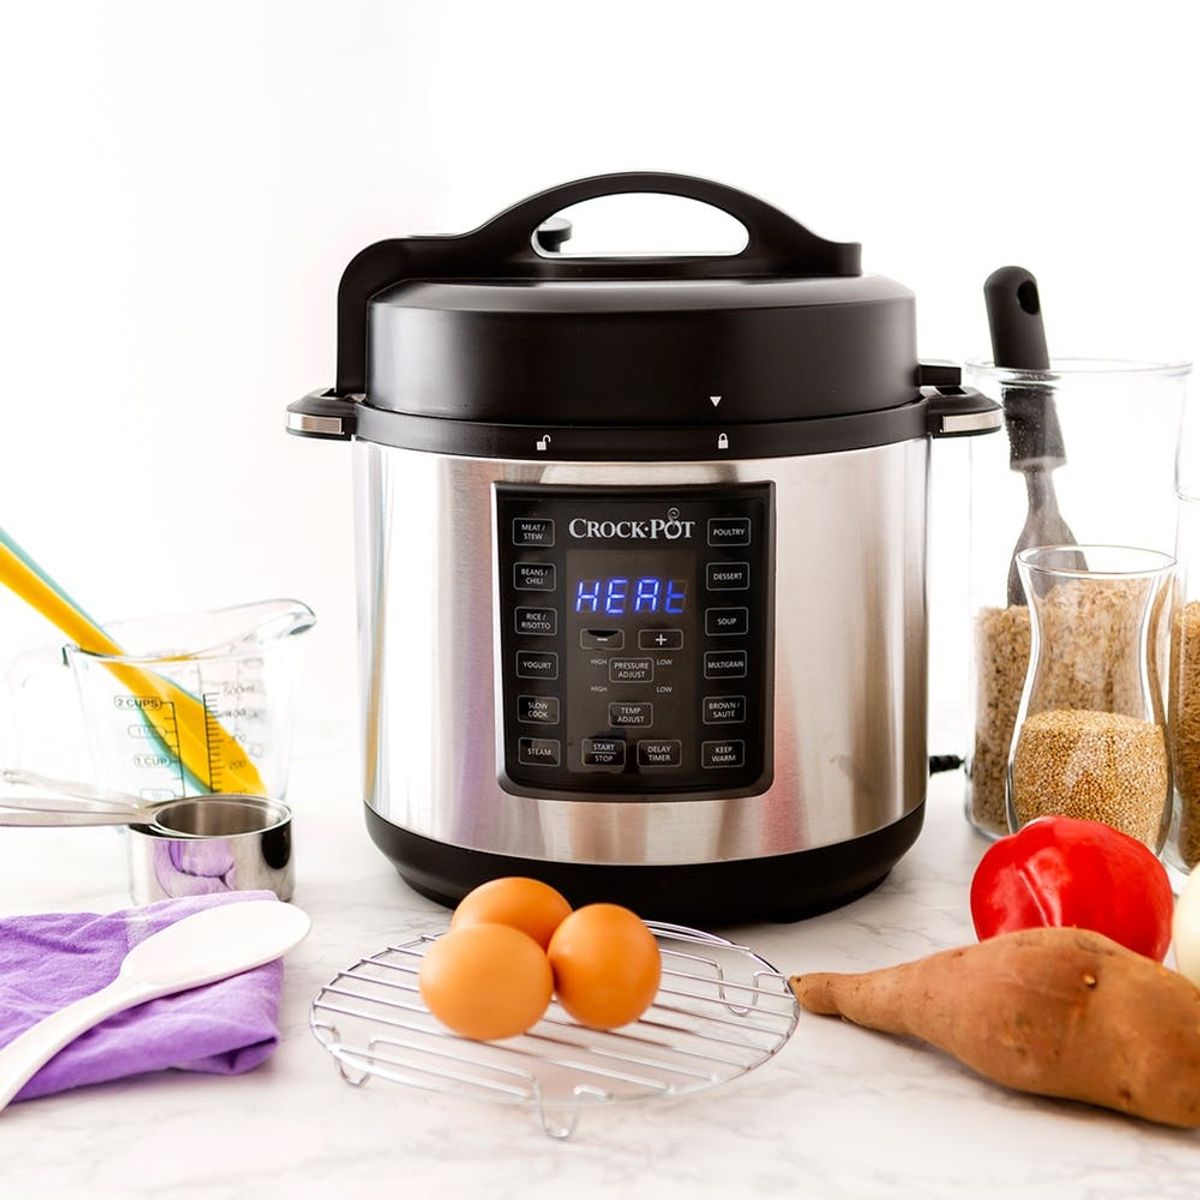 Everything You Need to Know About Crock-Pot’s Version of the Instant Pot